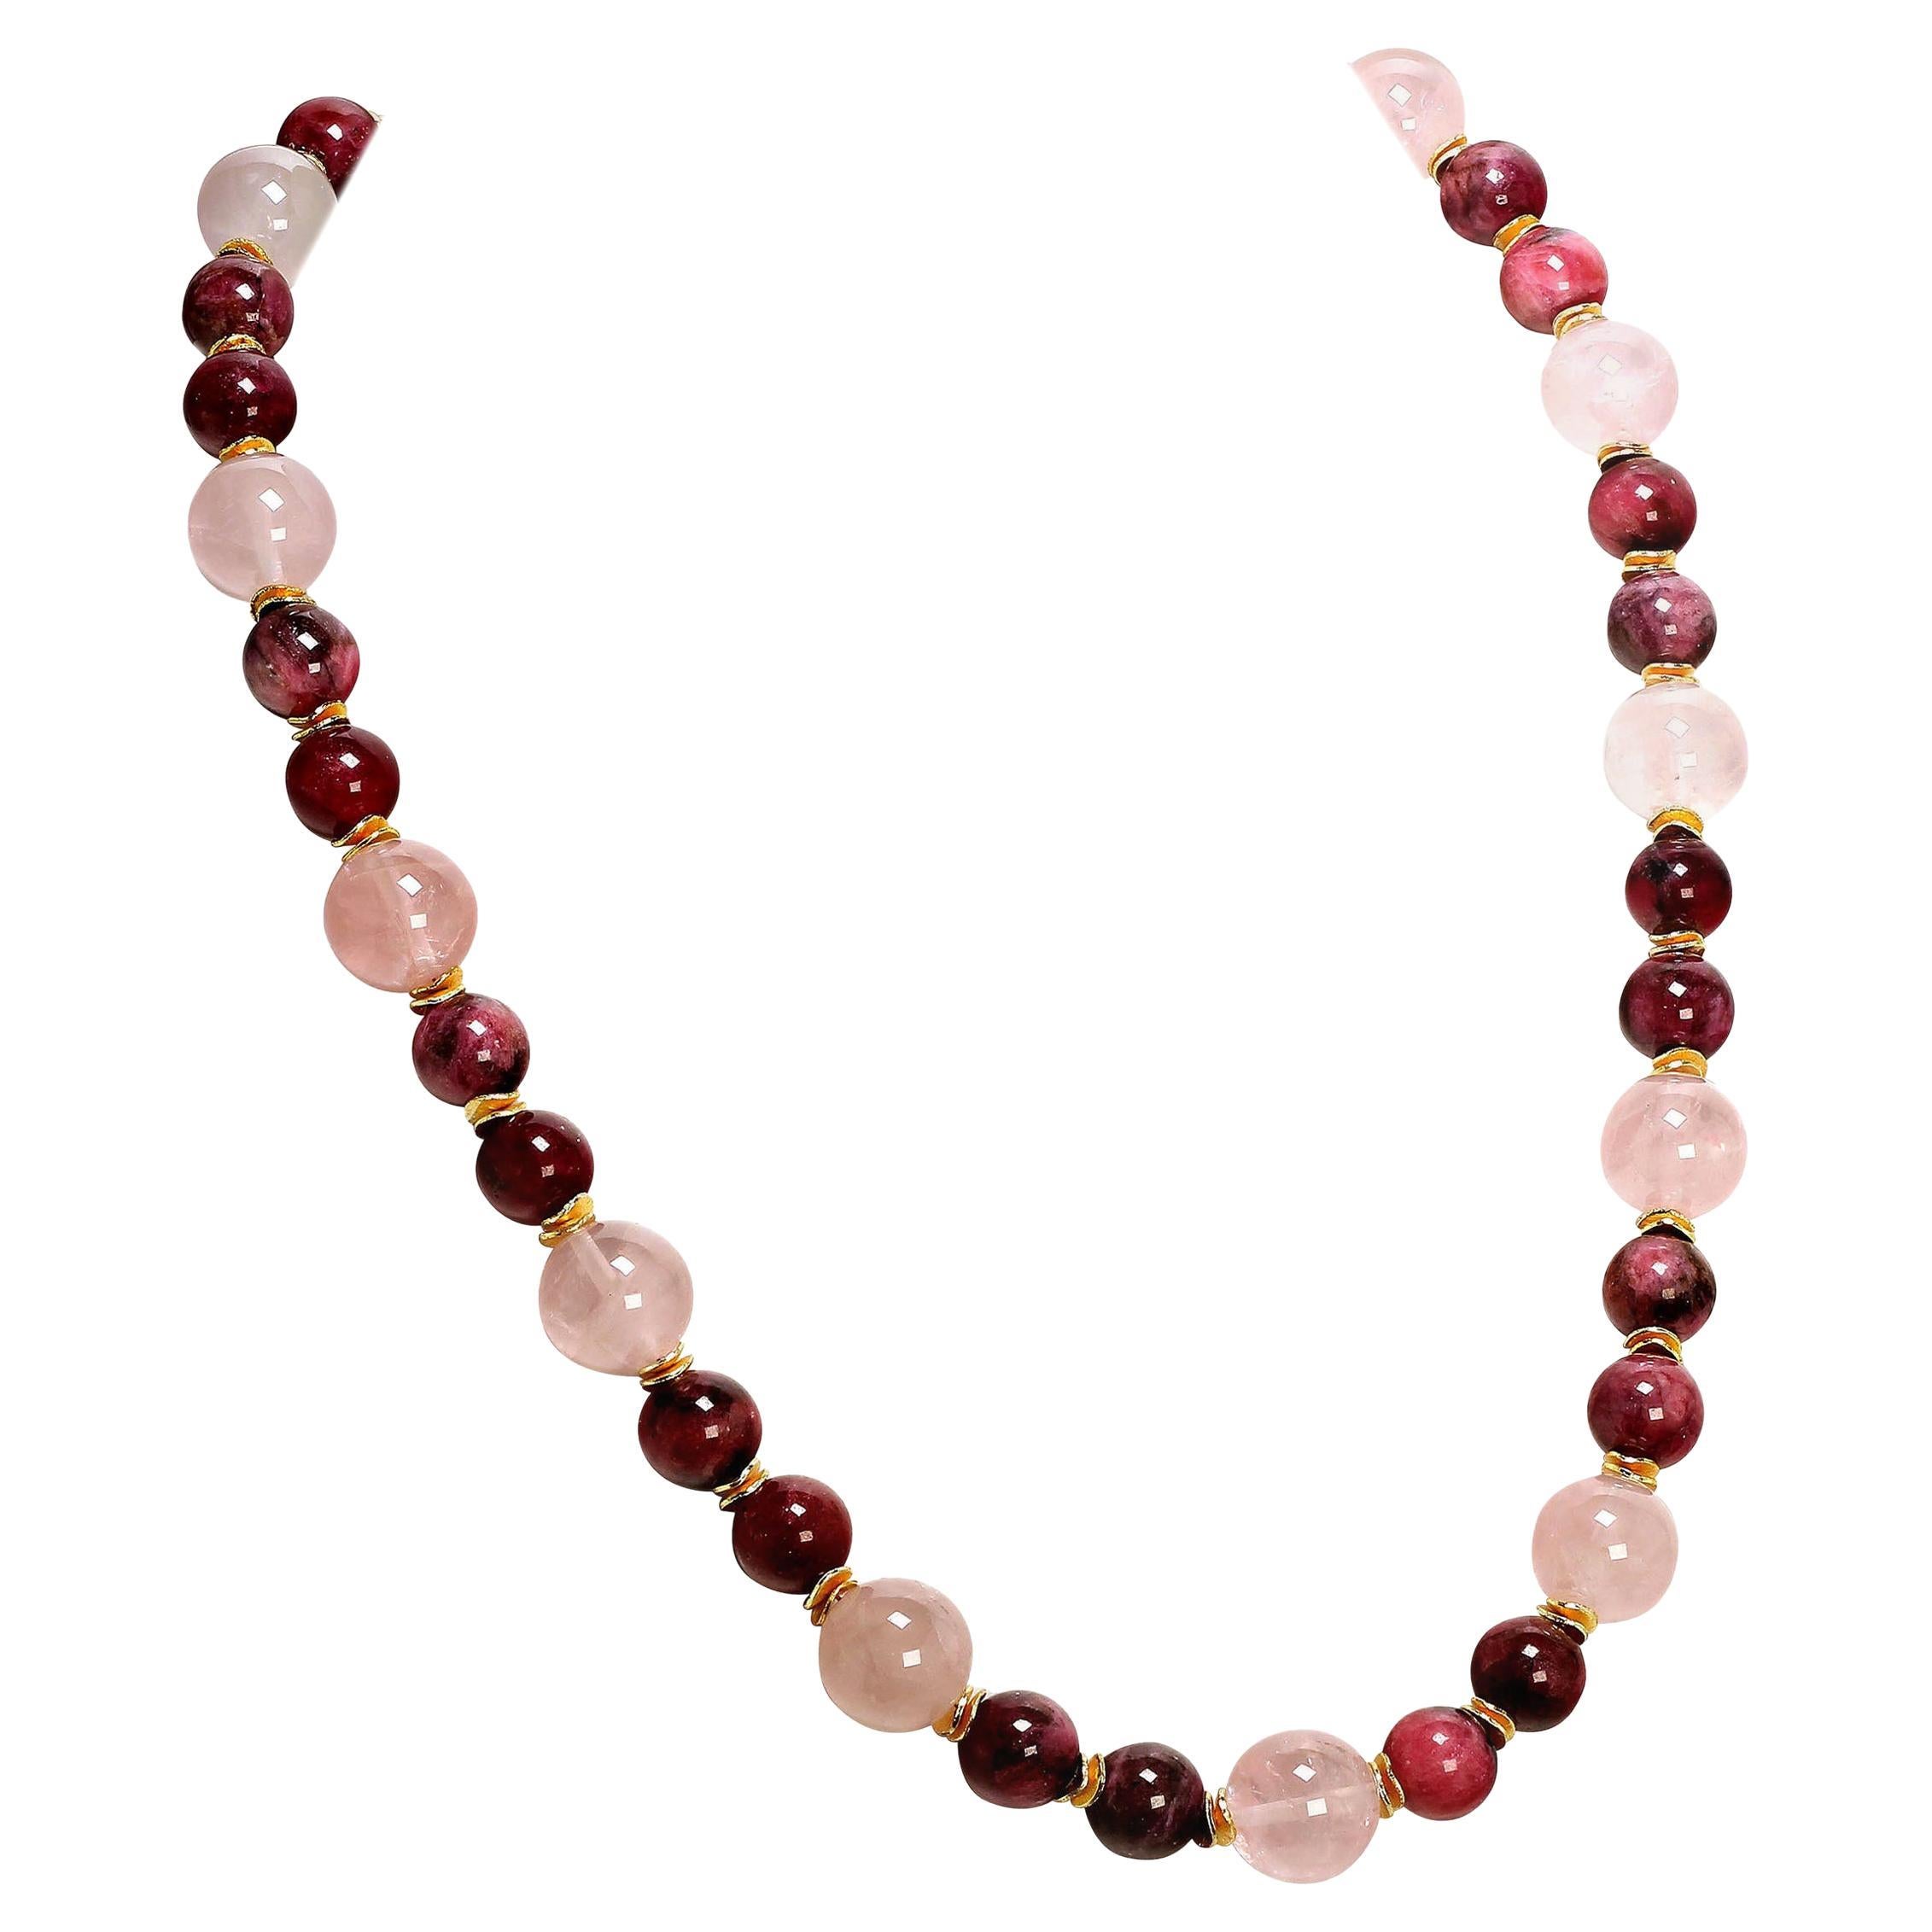 AJD 24 Inch Necklace of Polished Rhodonite and Rose Quartz  Great Gift!!